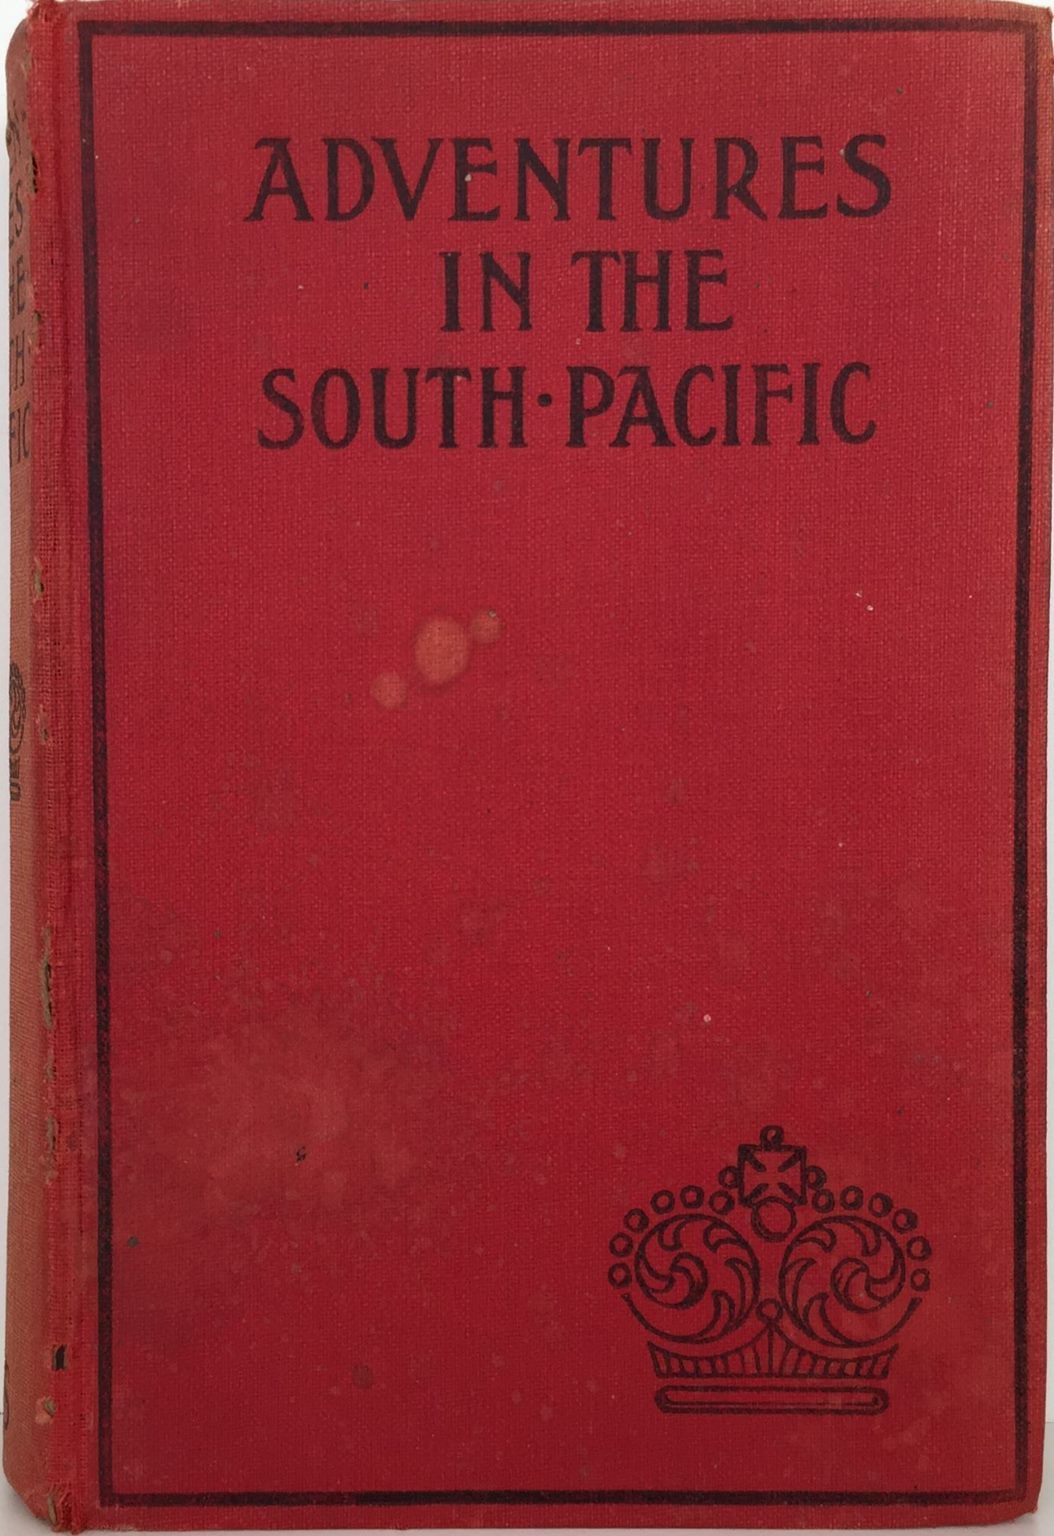 ADVENTURES IN THE SOUTH PACIFIC by One Who Was Born There